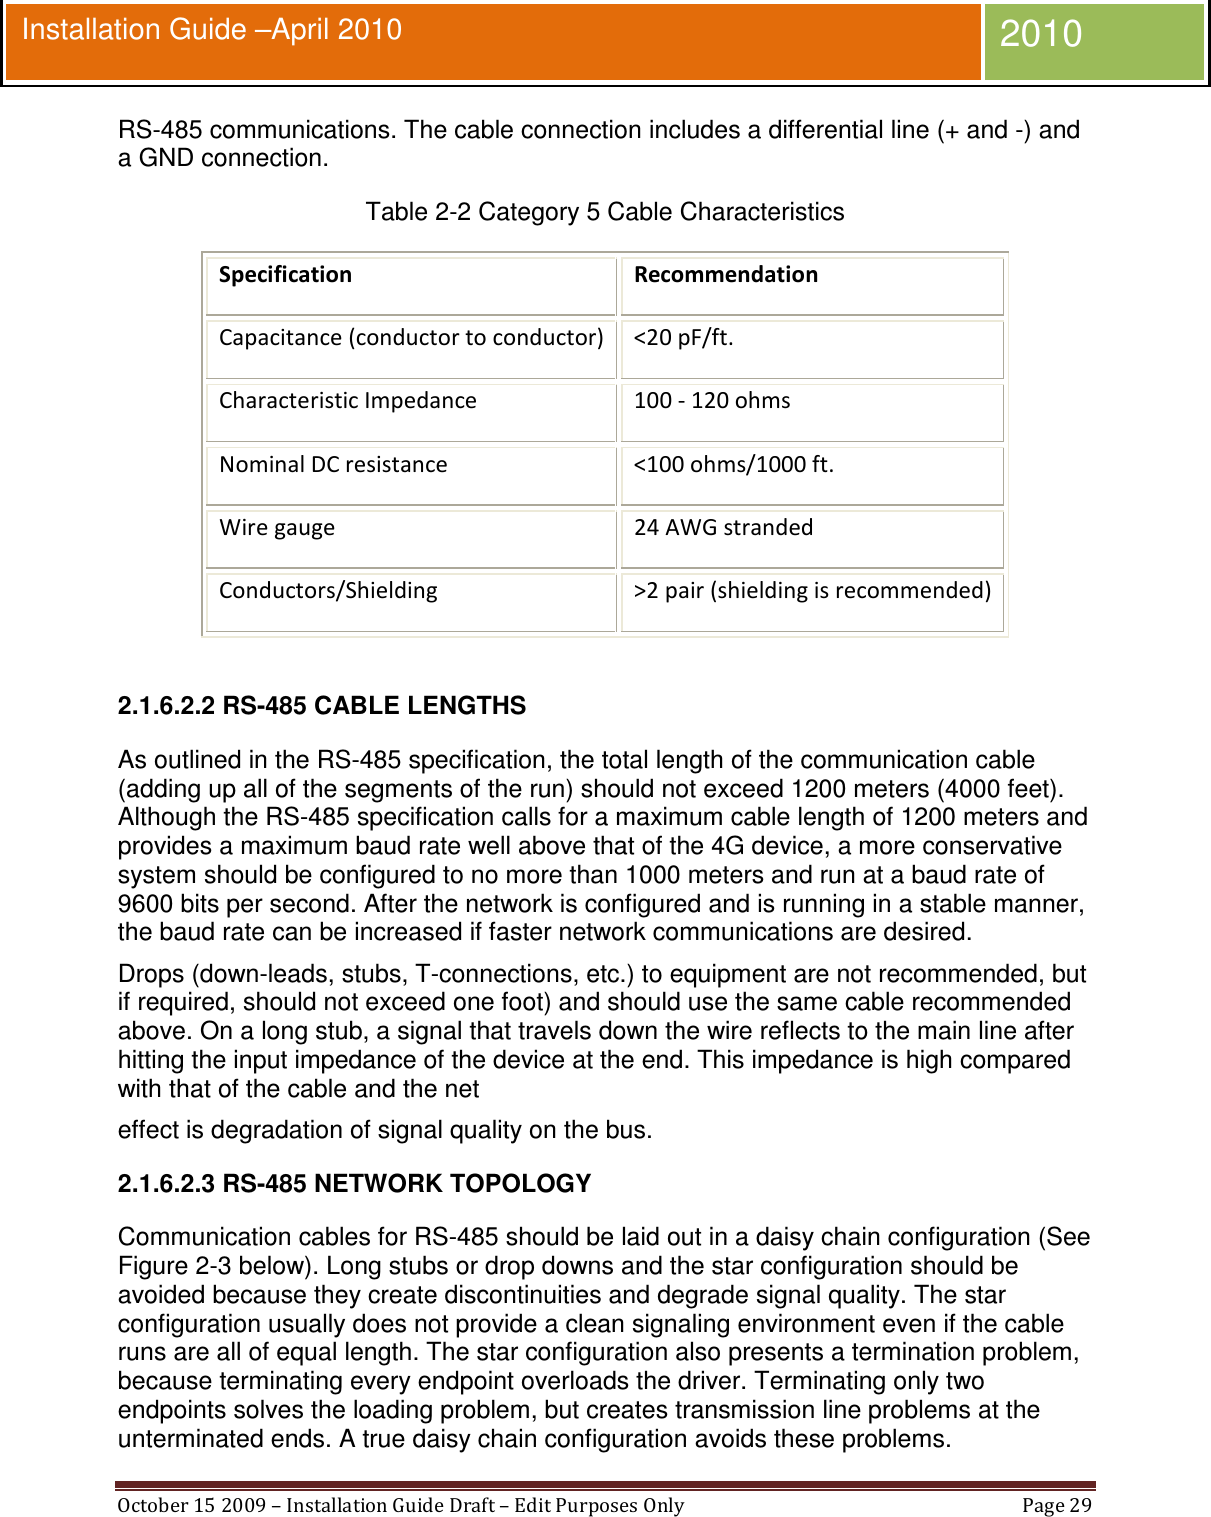  October 15 2009 – Installation Guide Draft – Edit Purposes Only  Page 29  Installation Guide –April 2010 2010 RS-485 communications. The cable connection includes a differential line (+ and -) and a GND connection. Table 2-2 Category 5 Cable Characteristics Specification Recommendation  Capacitance (conductor to conductor)  &lt;20 pF/ft. Characteristic Impedance   100 - 120 ohms  Nominal DC resistance   &lt;100 ohms/1000 ft. Wire gauge   24 AWG stranded  Conductors/Shielding   &gt;2 pair (shielding is recommended)   2.1.6.2.2 RS-485 CABLE LENGTHS As outlined in the RS-485 specification, the total length of the communication cable (adding up all of the segments of the run) should not exceed 1200 meters (4000 feet). Although the RS-485 specification calls for a maximum cable length of 1200 meters and provides a maximum baud rate well above that of the 4G device, a more conservative system should be configured to no more than 1000 meters and run at a baud rate of 9600 bits per second. After the network is configured and is running in a stable manner, the baud rate can be increased if faster network communications are desired. Drops (down-leads, stubs, T-connections, etc.) to equipment are not recommended, but if required, should not exceed one foot) and should use the same cable recommended above. On a long stub, a signal that travels down the wire reflects to the main line after hitting the input impedance of the device at the end. This impedance is high compared with that of the cable and the net effect is degradation of signal quality on the bus. 2.1.6.2.3 RS-485 NETWORK TOPOLOGY Communication cables for RS-485 should be laid out in a daisy chain configuration (See Figure 2-3 below). Long stubs or drop downs and the star configuration should be avoided because they create discontinuities and degrade signal quality. The star configuration usually does not provide a clean signaling environment even if the cable runs are all of equal length. The star configuration also presents a termination problem, because terminating every endpoint overloads the driver. Terminating only two endpoints solves the loading problem, but creates transmission line problems at the unterminated ends. A true daisy chain configuration avoids these problems. 